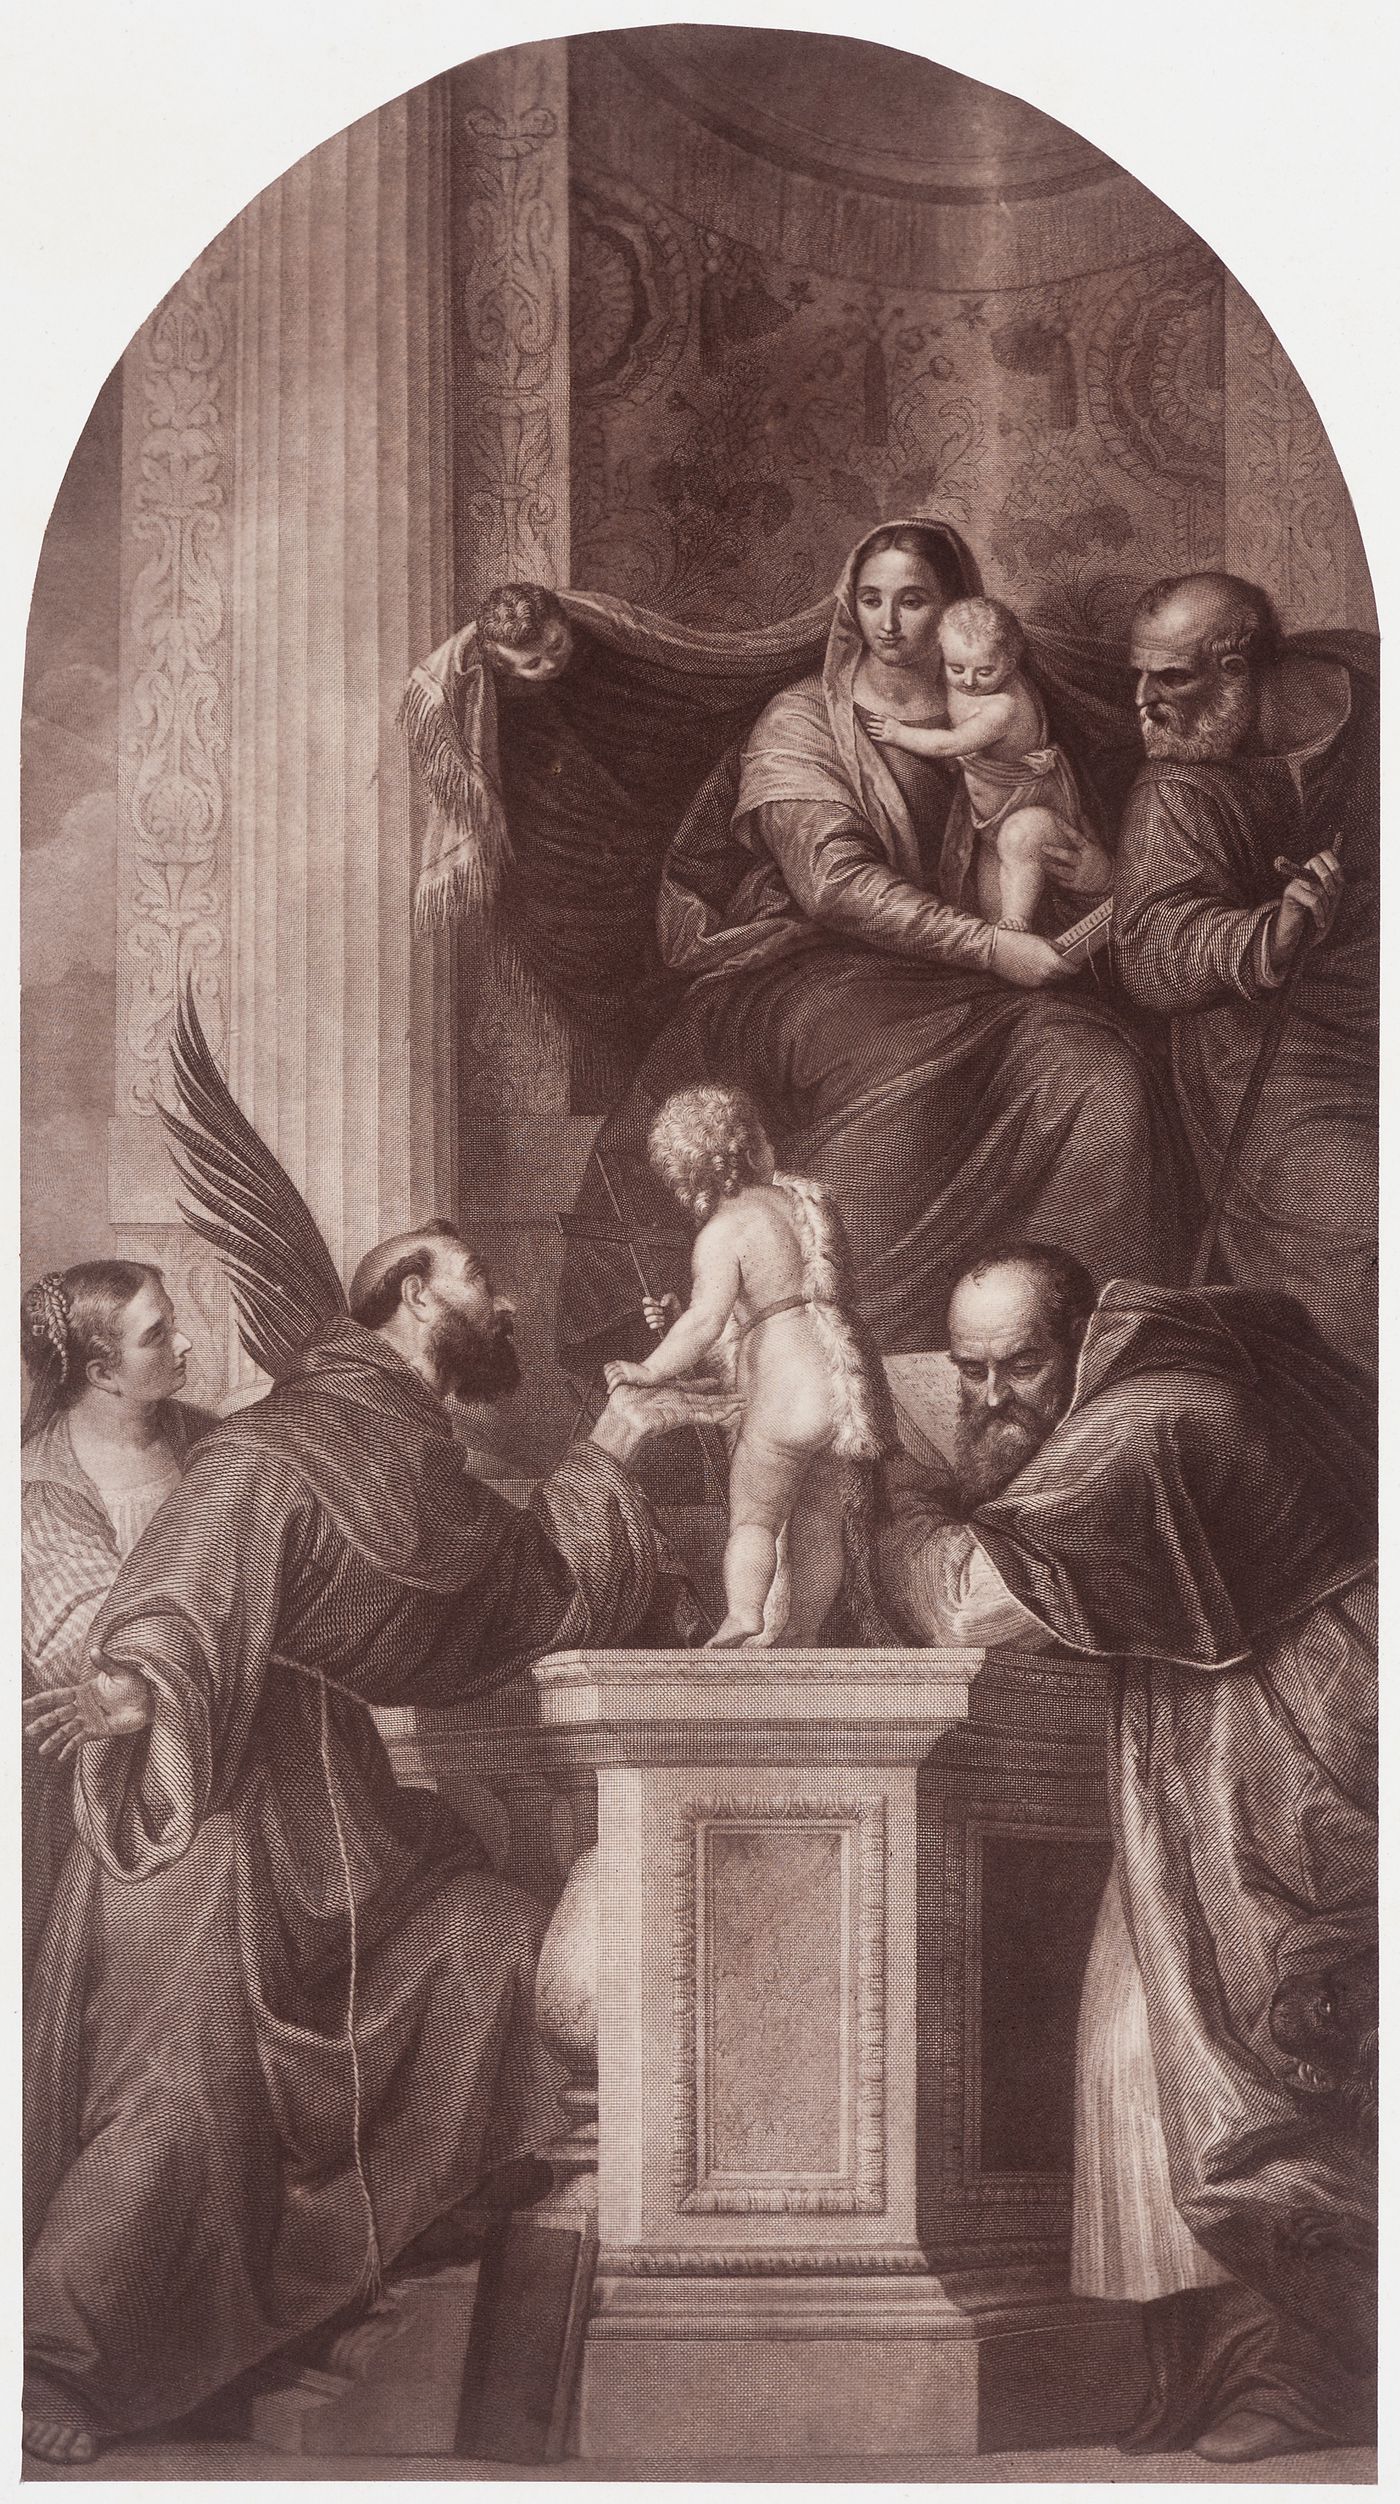 Photograph of the "Madonna and Child with Saints" by Veronese, Gallerie dell'Accademia, Venice